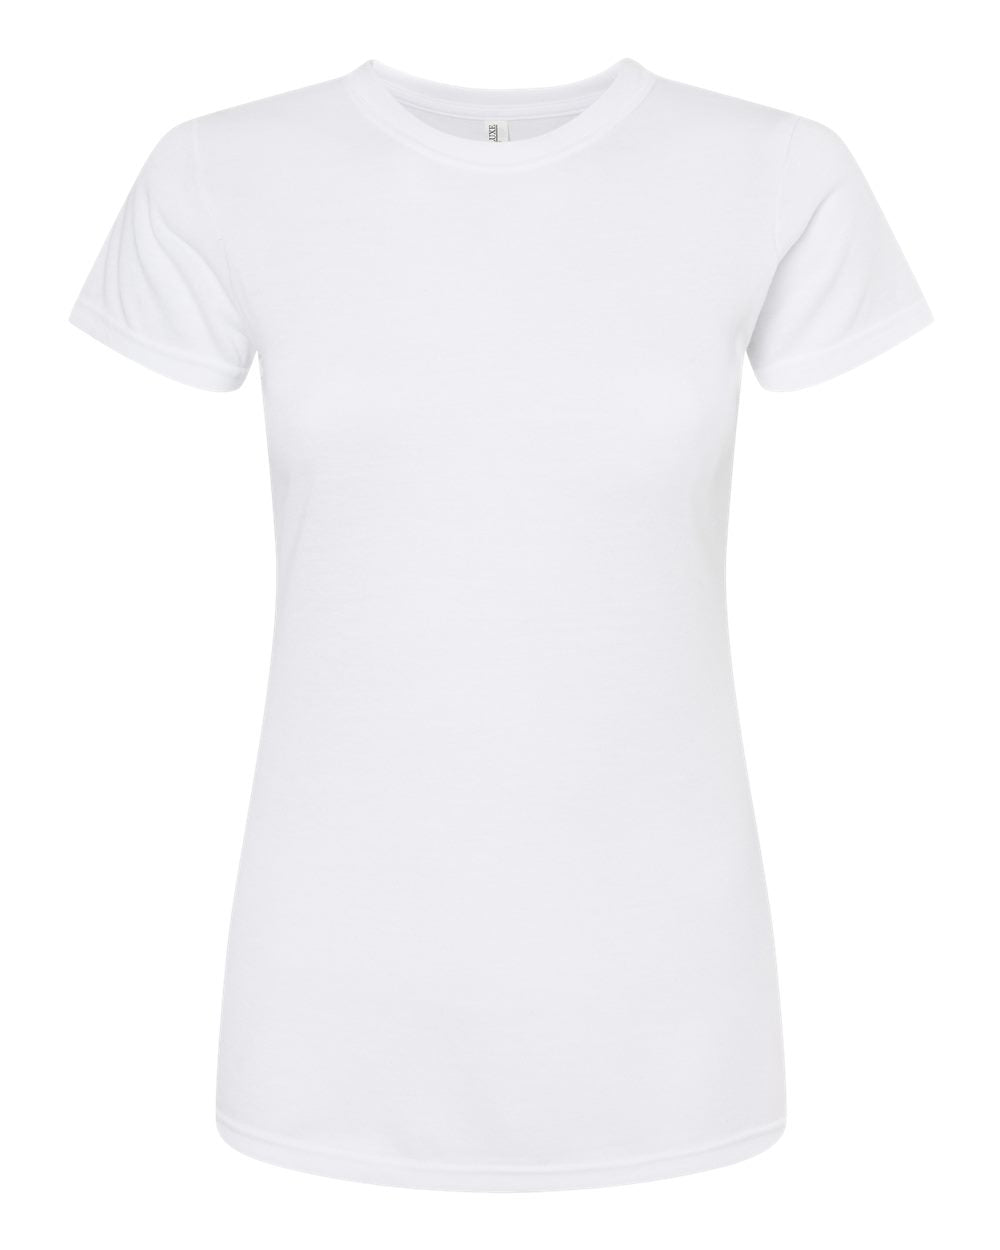 Deluxe Blend - Ladies T-Shirt - M&O 3540